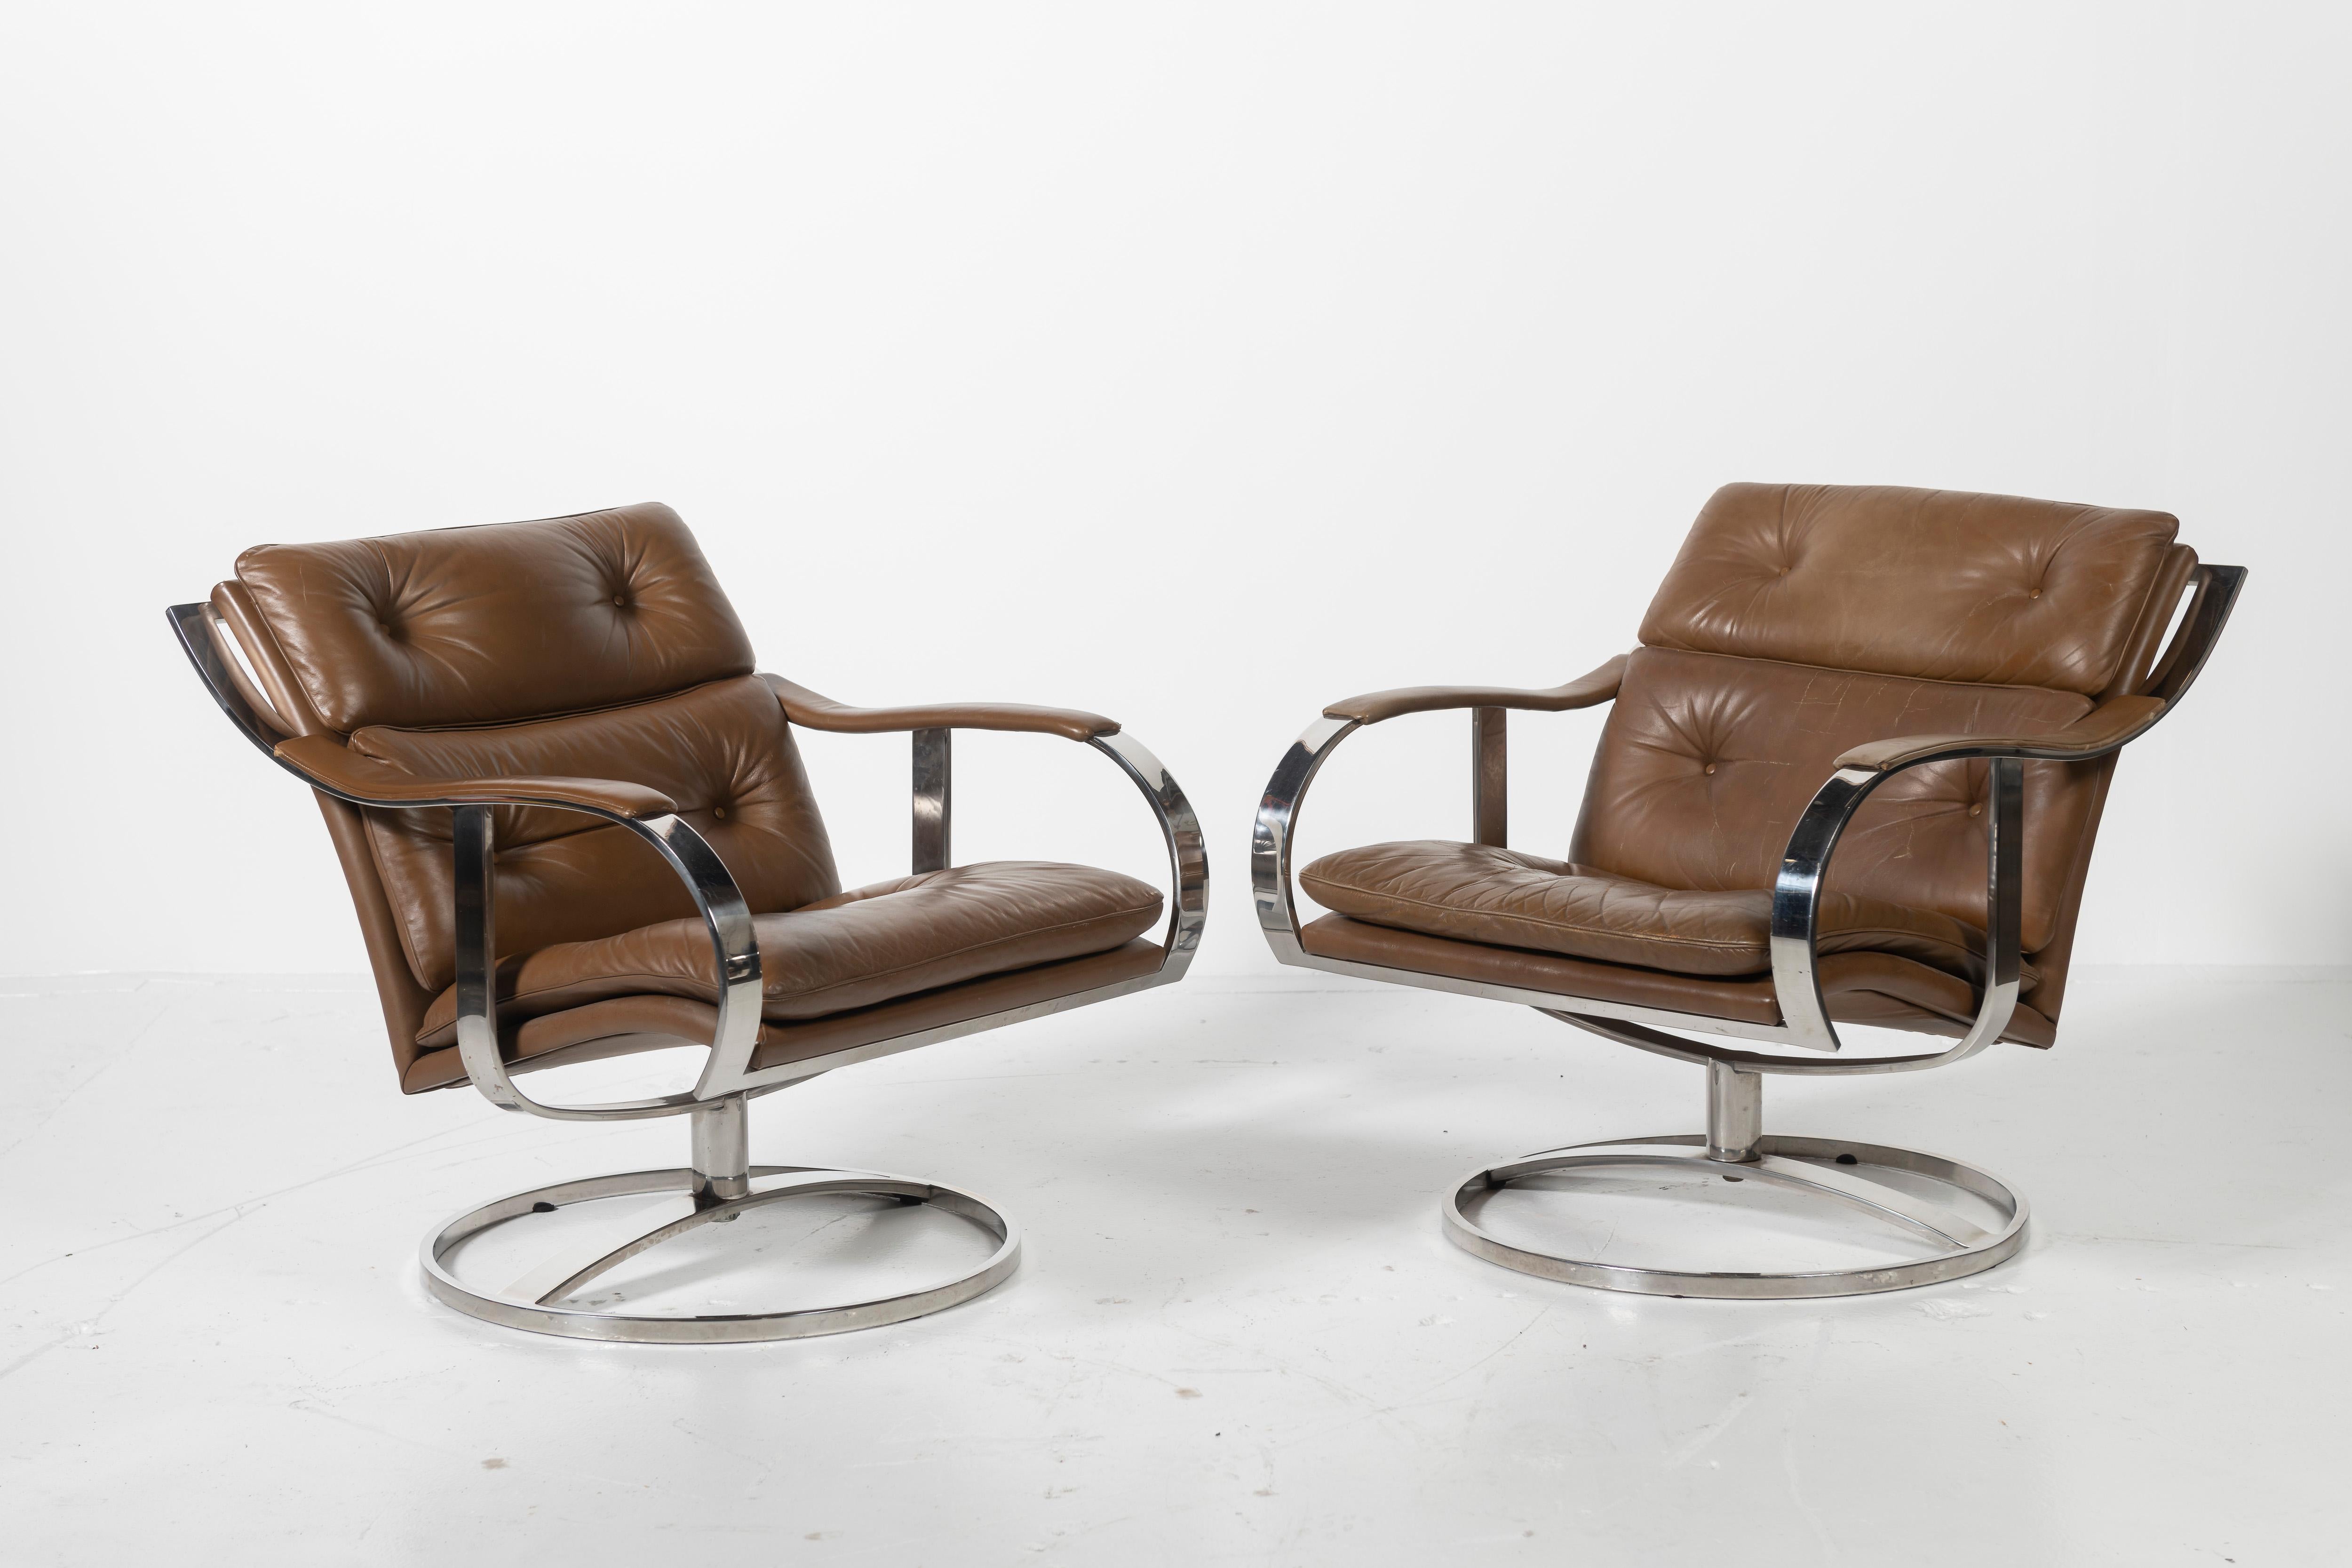 Pair of classic lounge chairs designed by Gardner Leaver for Steelcase, circa 1970s in the US. The steel frame is finished in chrome with rounded and square edges. The chairs are upholstered in the original brown leather, leather featuring tufted